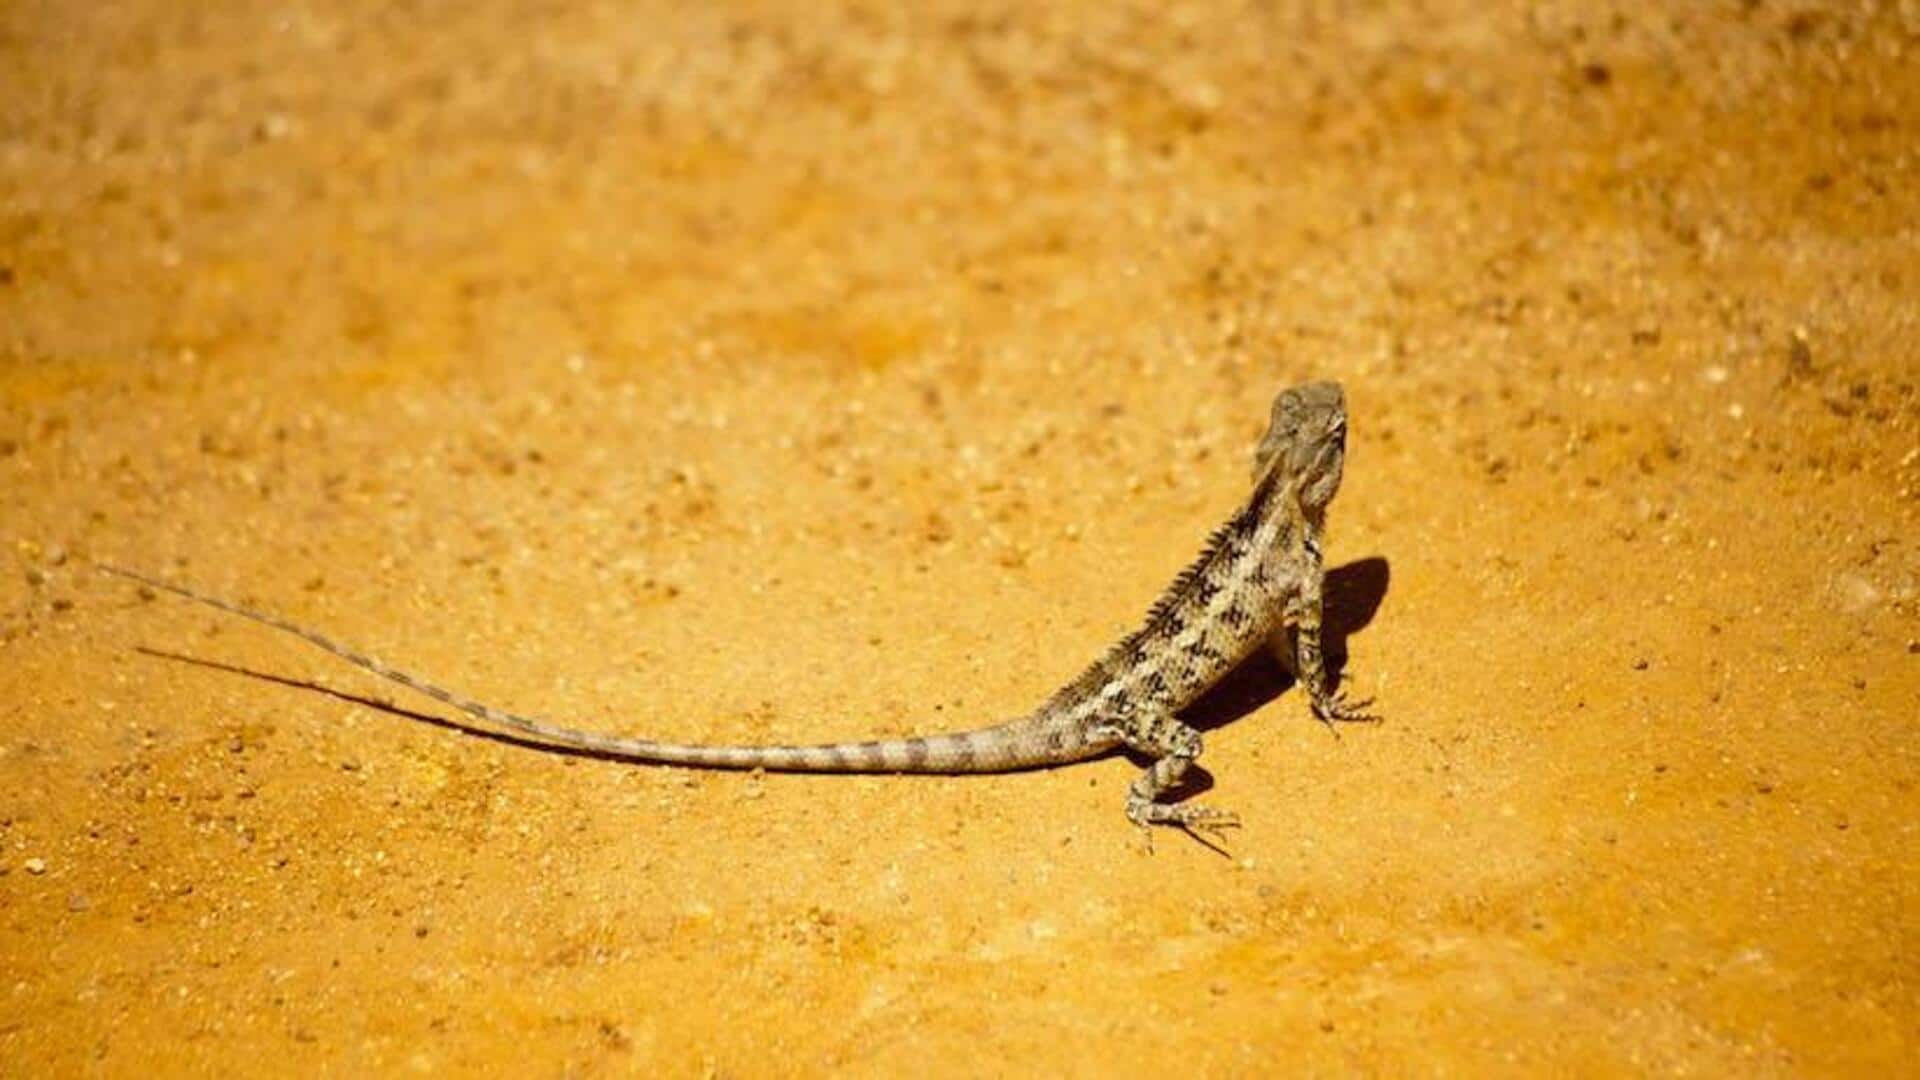 World Lizard Day: Facts about lizards you probably didn't know